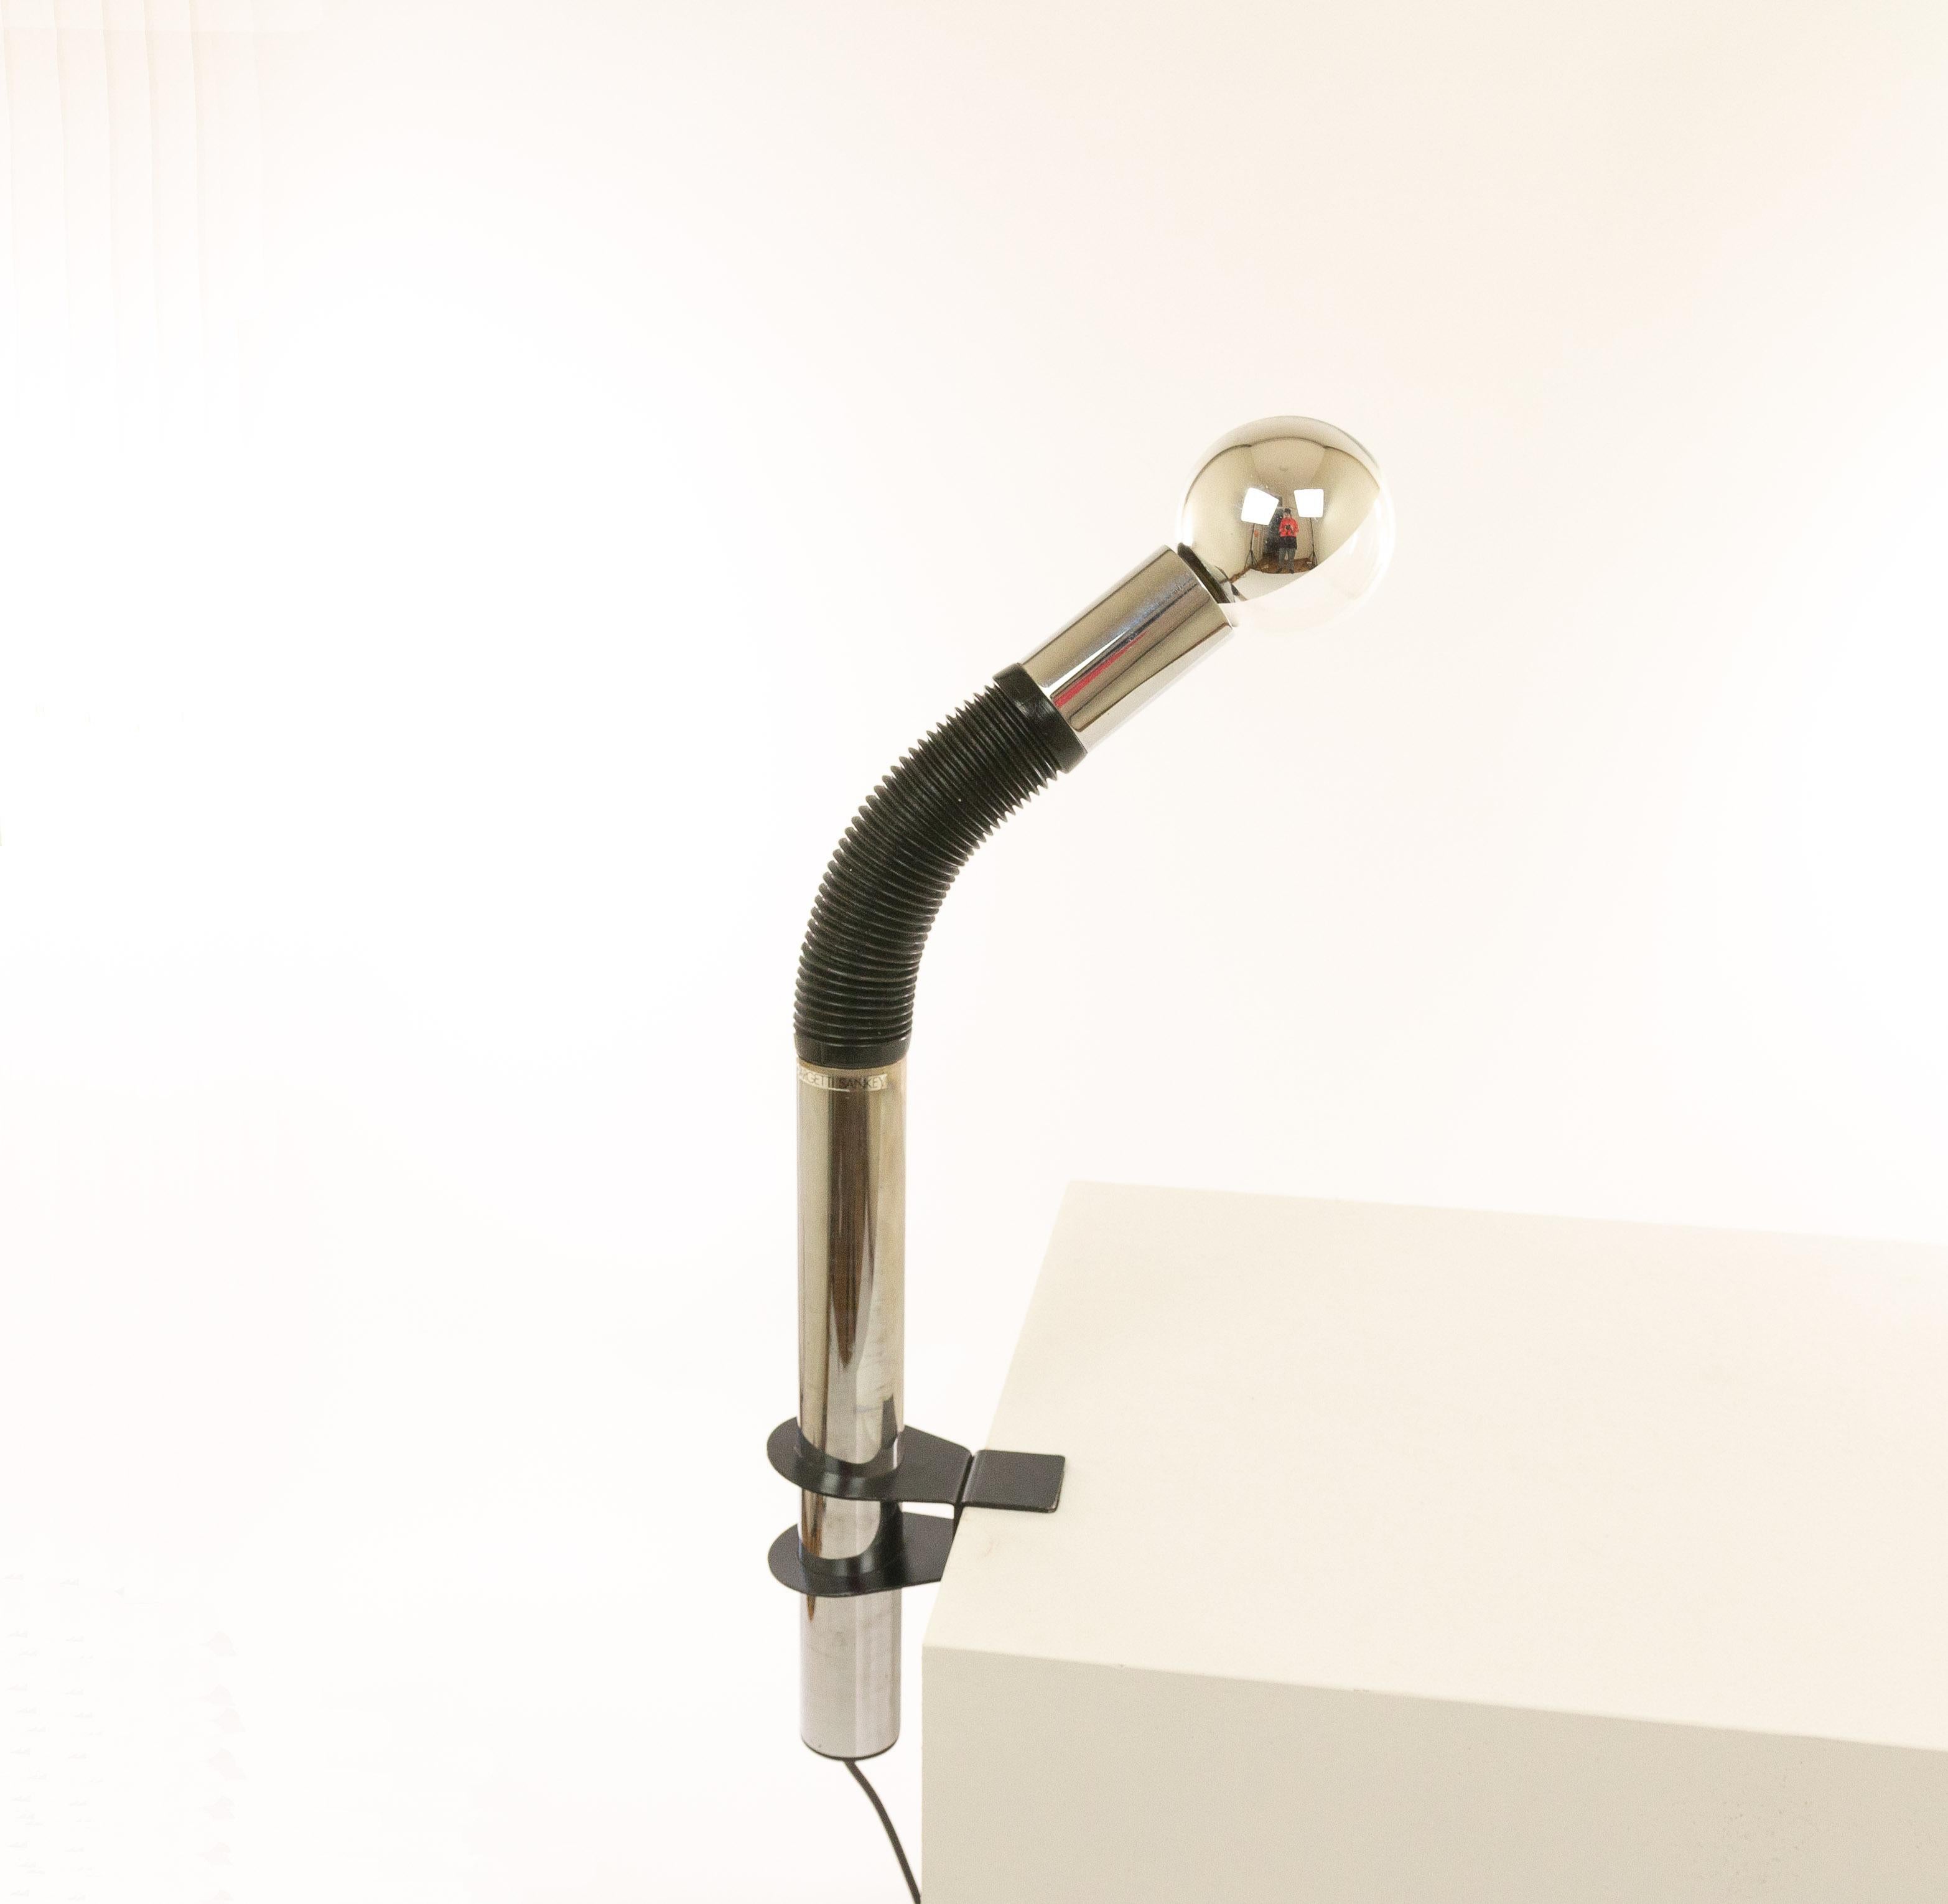 Elbow table lamp designed by E. Bellini and manufactured by Targetti Sankey in the 1970s.

The lamp is made of a chromed metal tube with a black rubber connection piece. The construction offers full flexibility. The black clamping element that